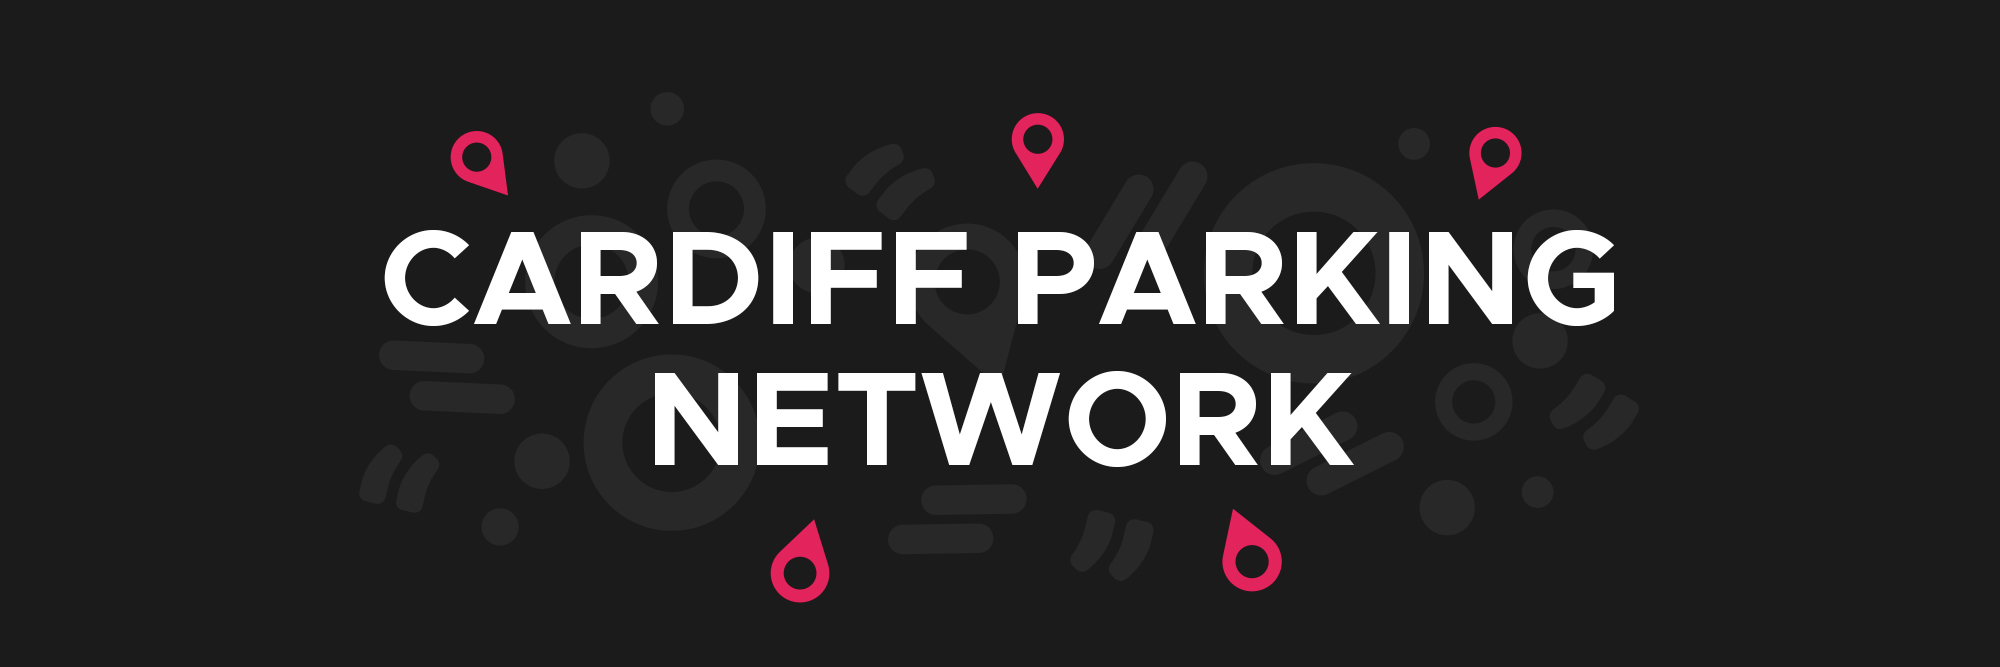 Cardiff Parking Network